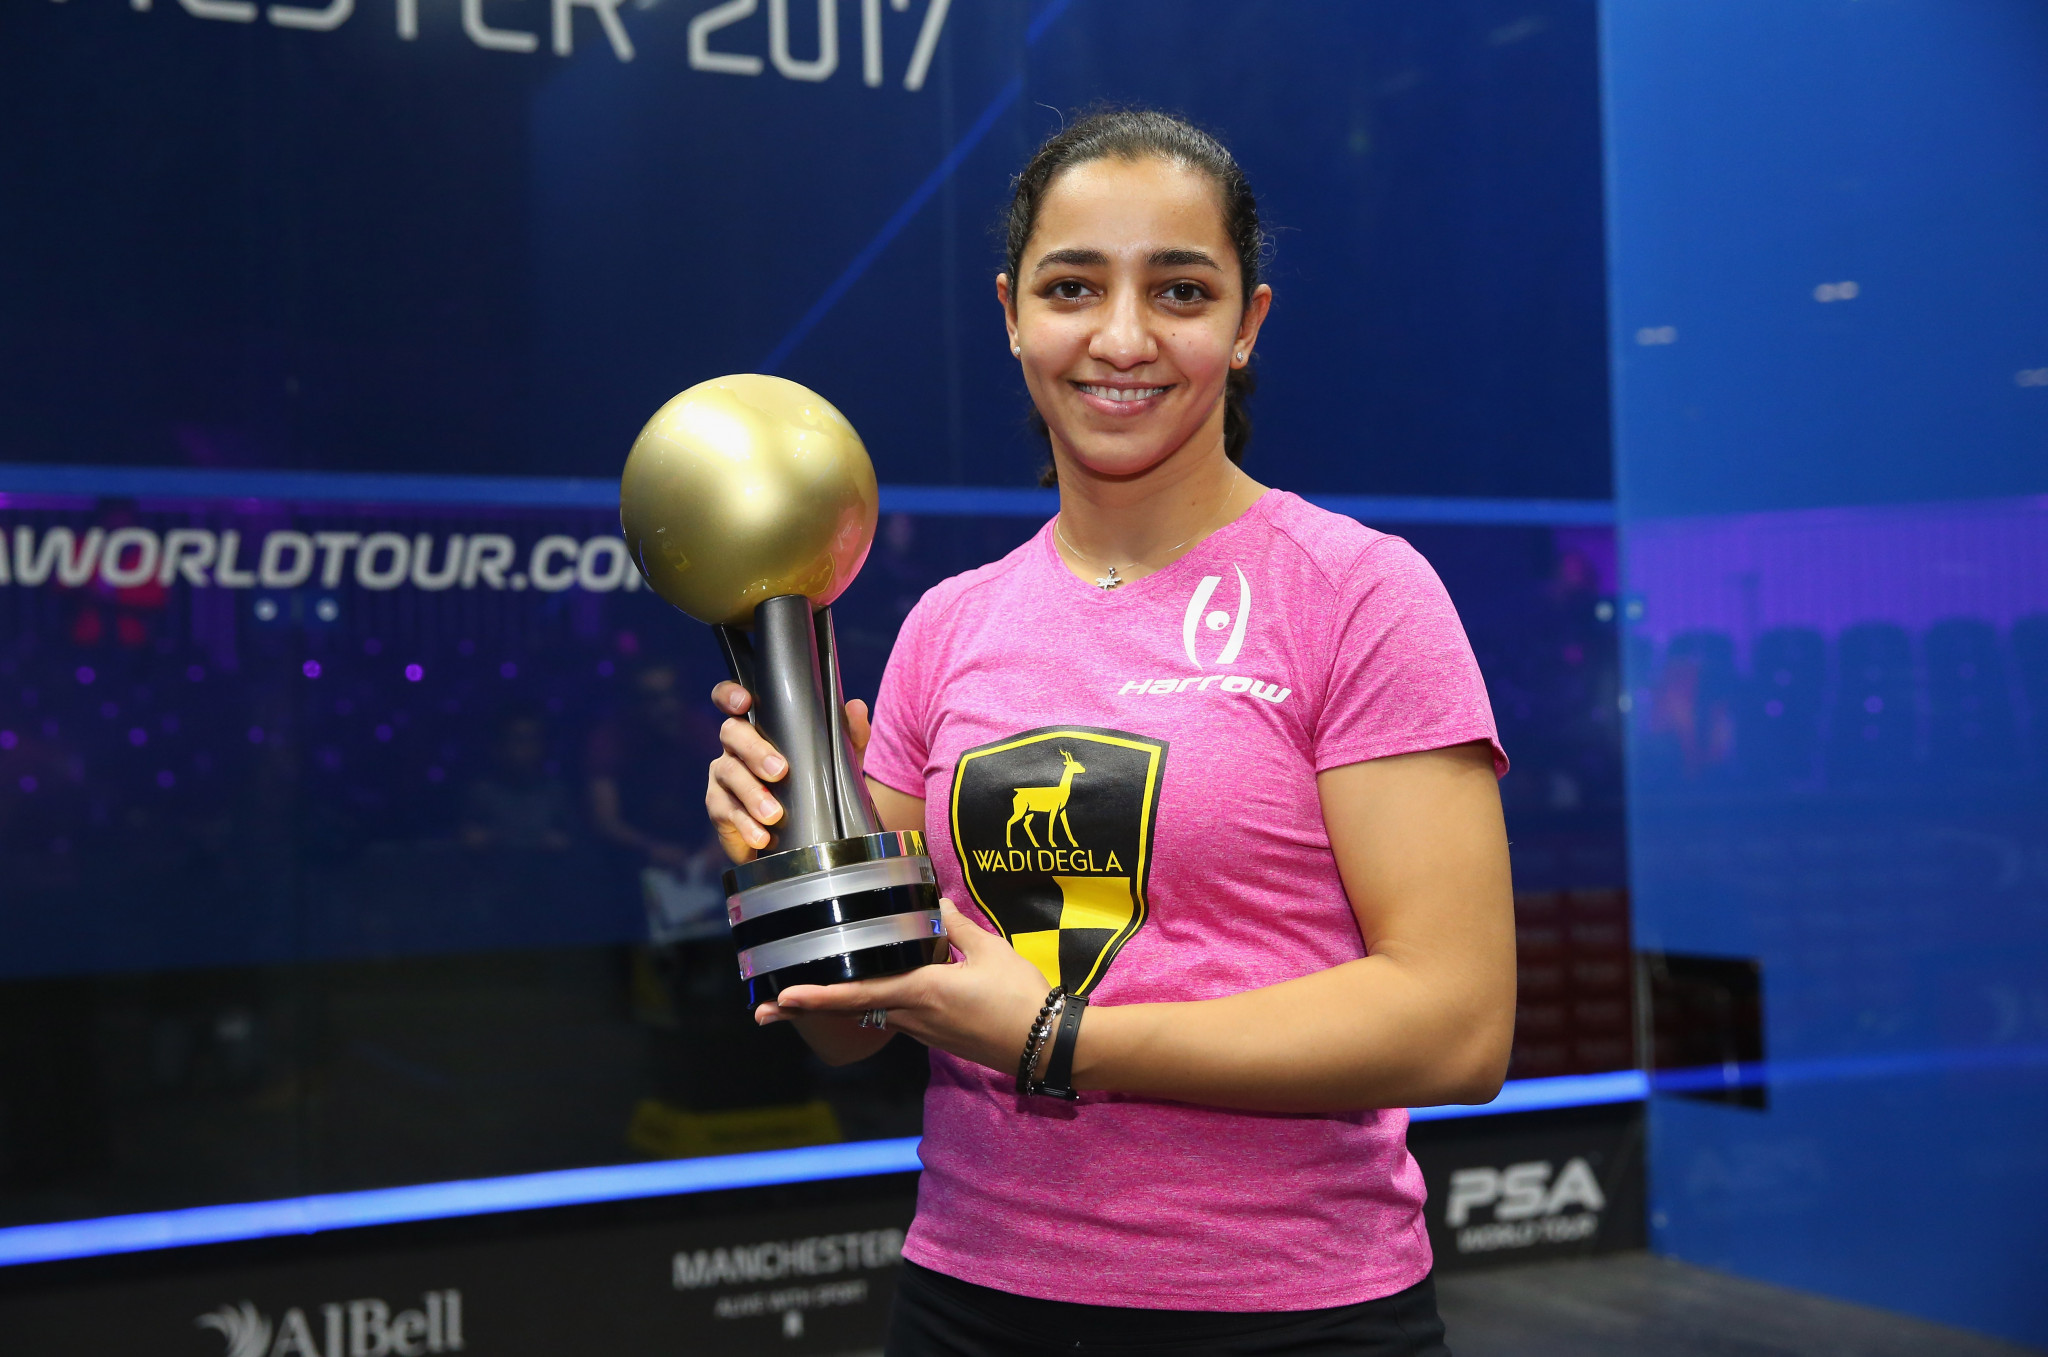 World number one El Welily announces immediate retirement from squash